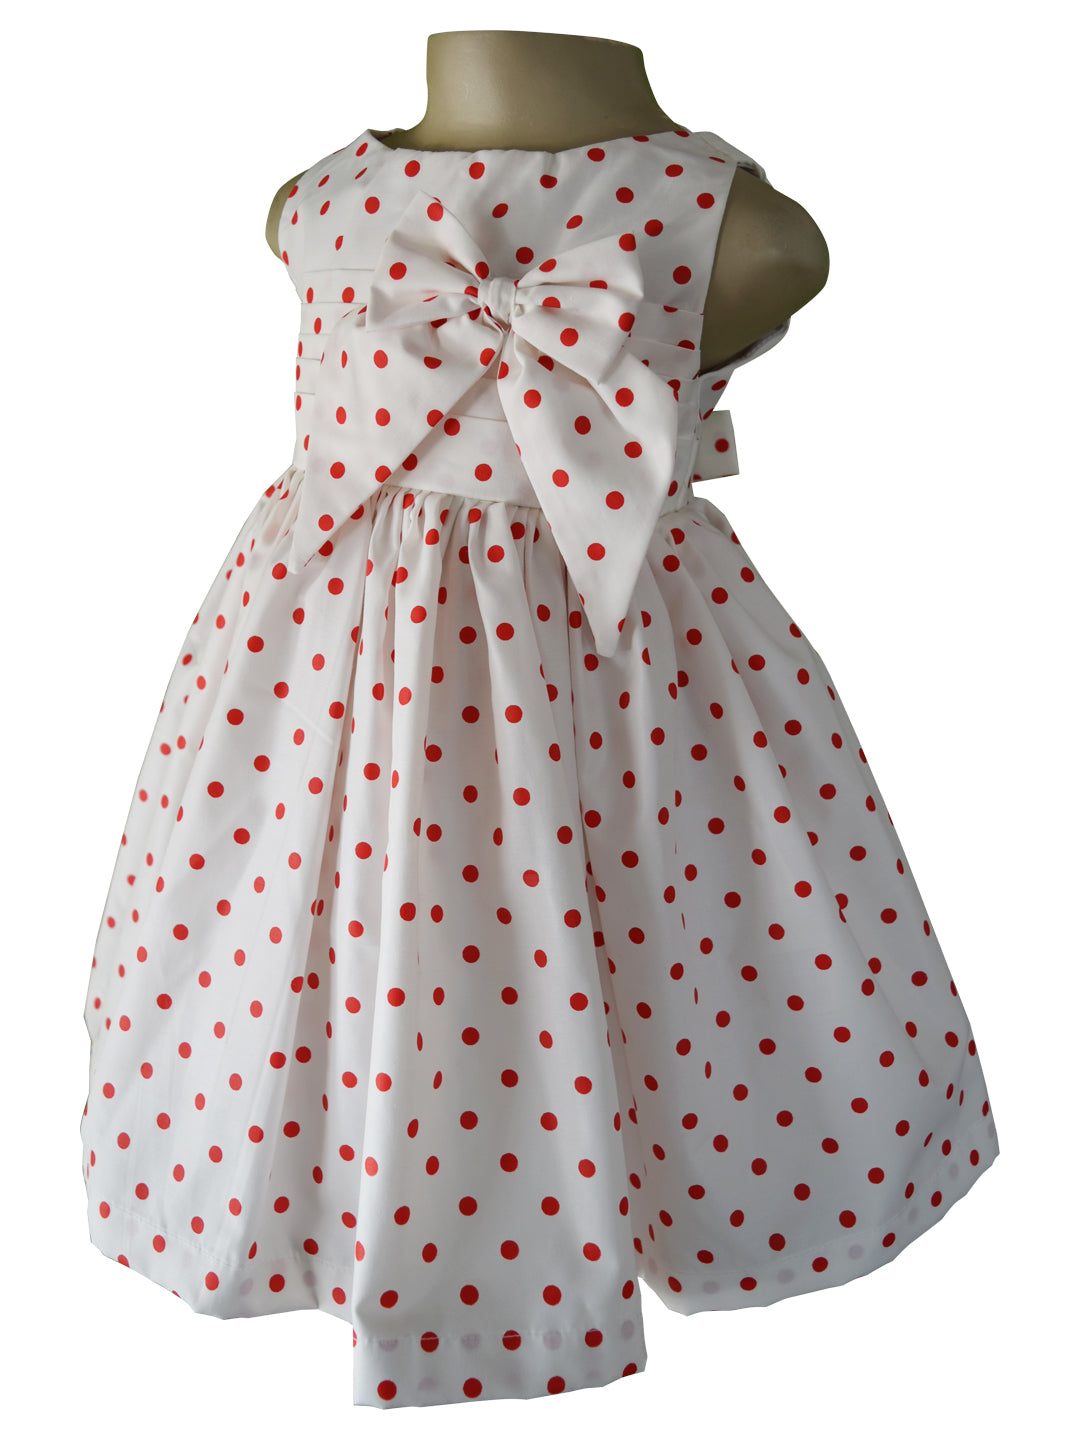 Amazon.com: Polka Dot Print Dress for Kids Girls Summer Sleeveless A-line  Dresses Party Dress Prom Gown Cute (Red, 11-12 Years) : Sports & Outdoors